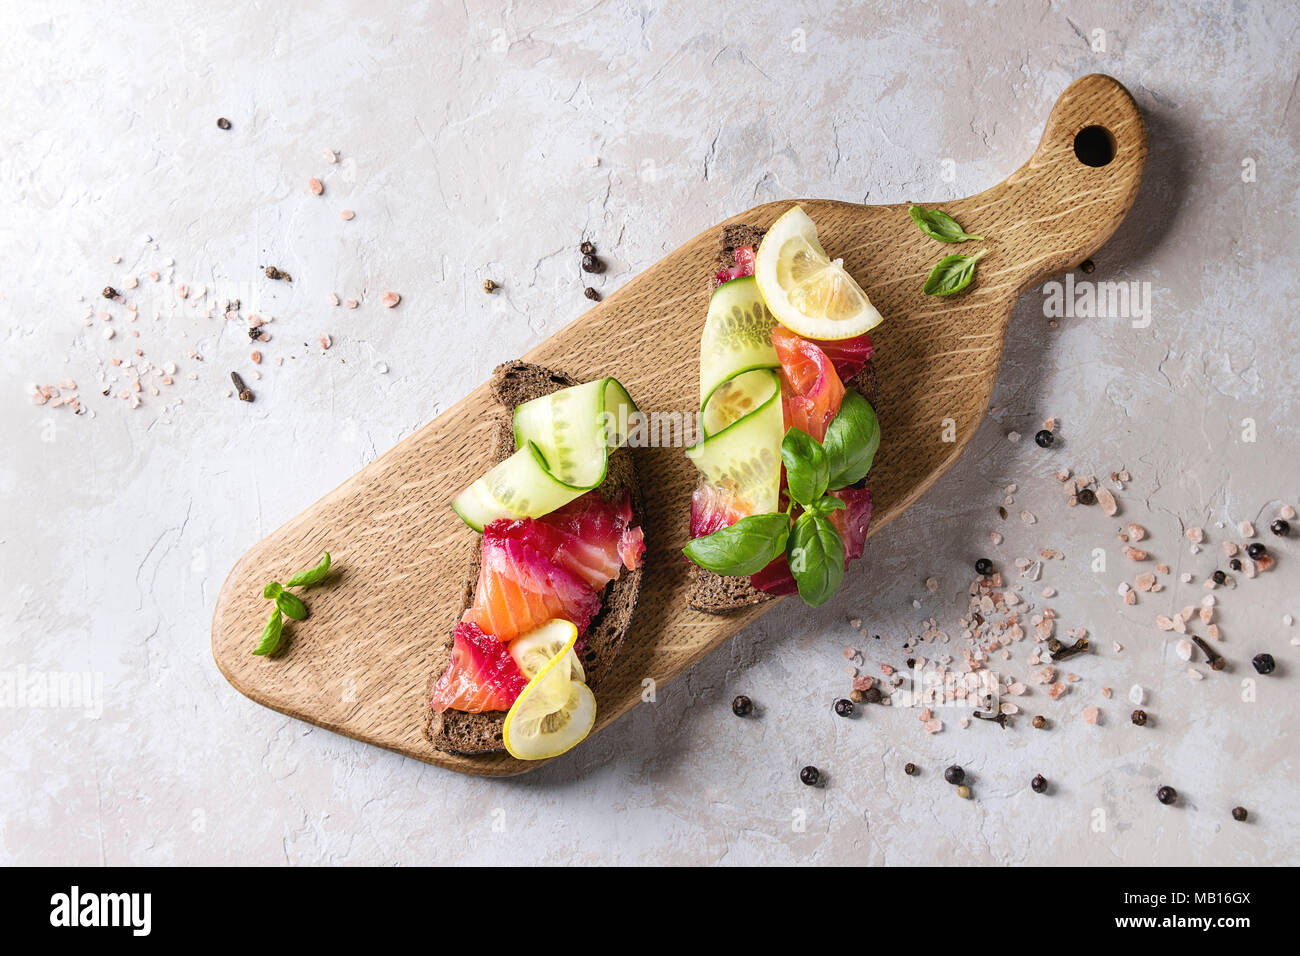 Sliced beetroot marinated salmon sandwiches with rye bread, cucumber, basil and lemon served on wooden cutting board over grey texture background. Top Stock Photo